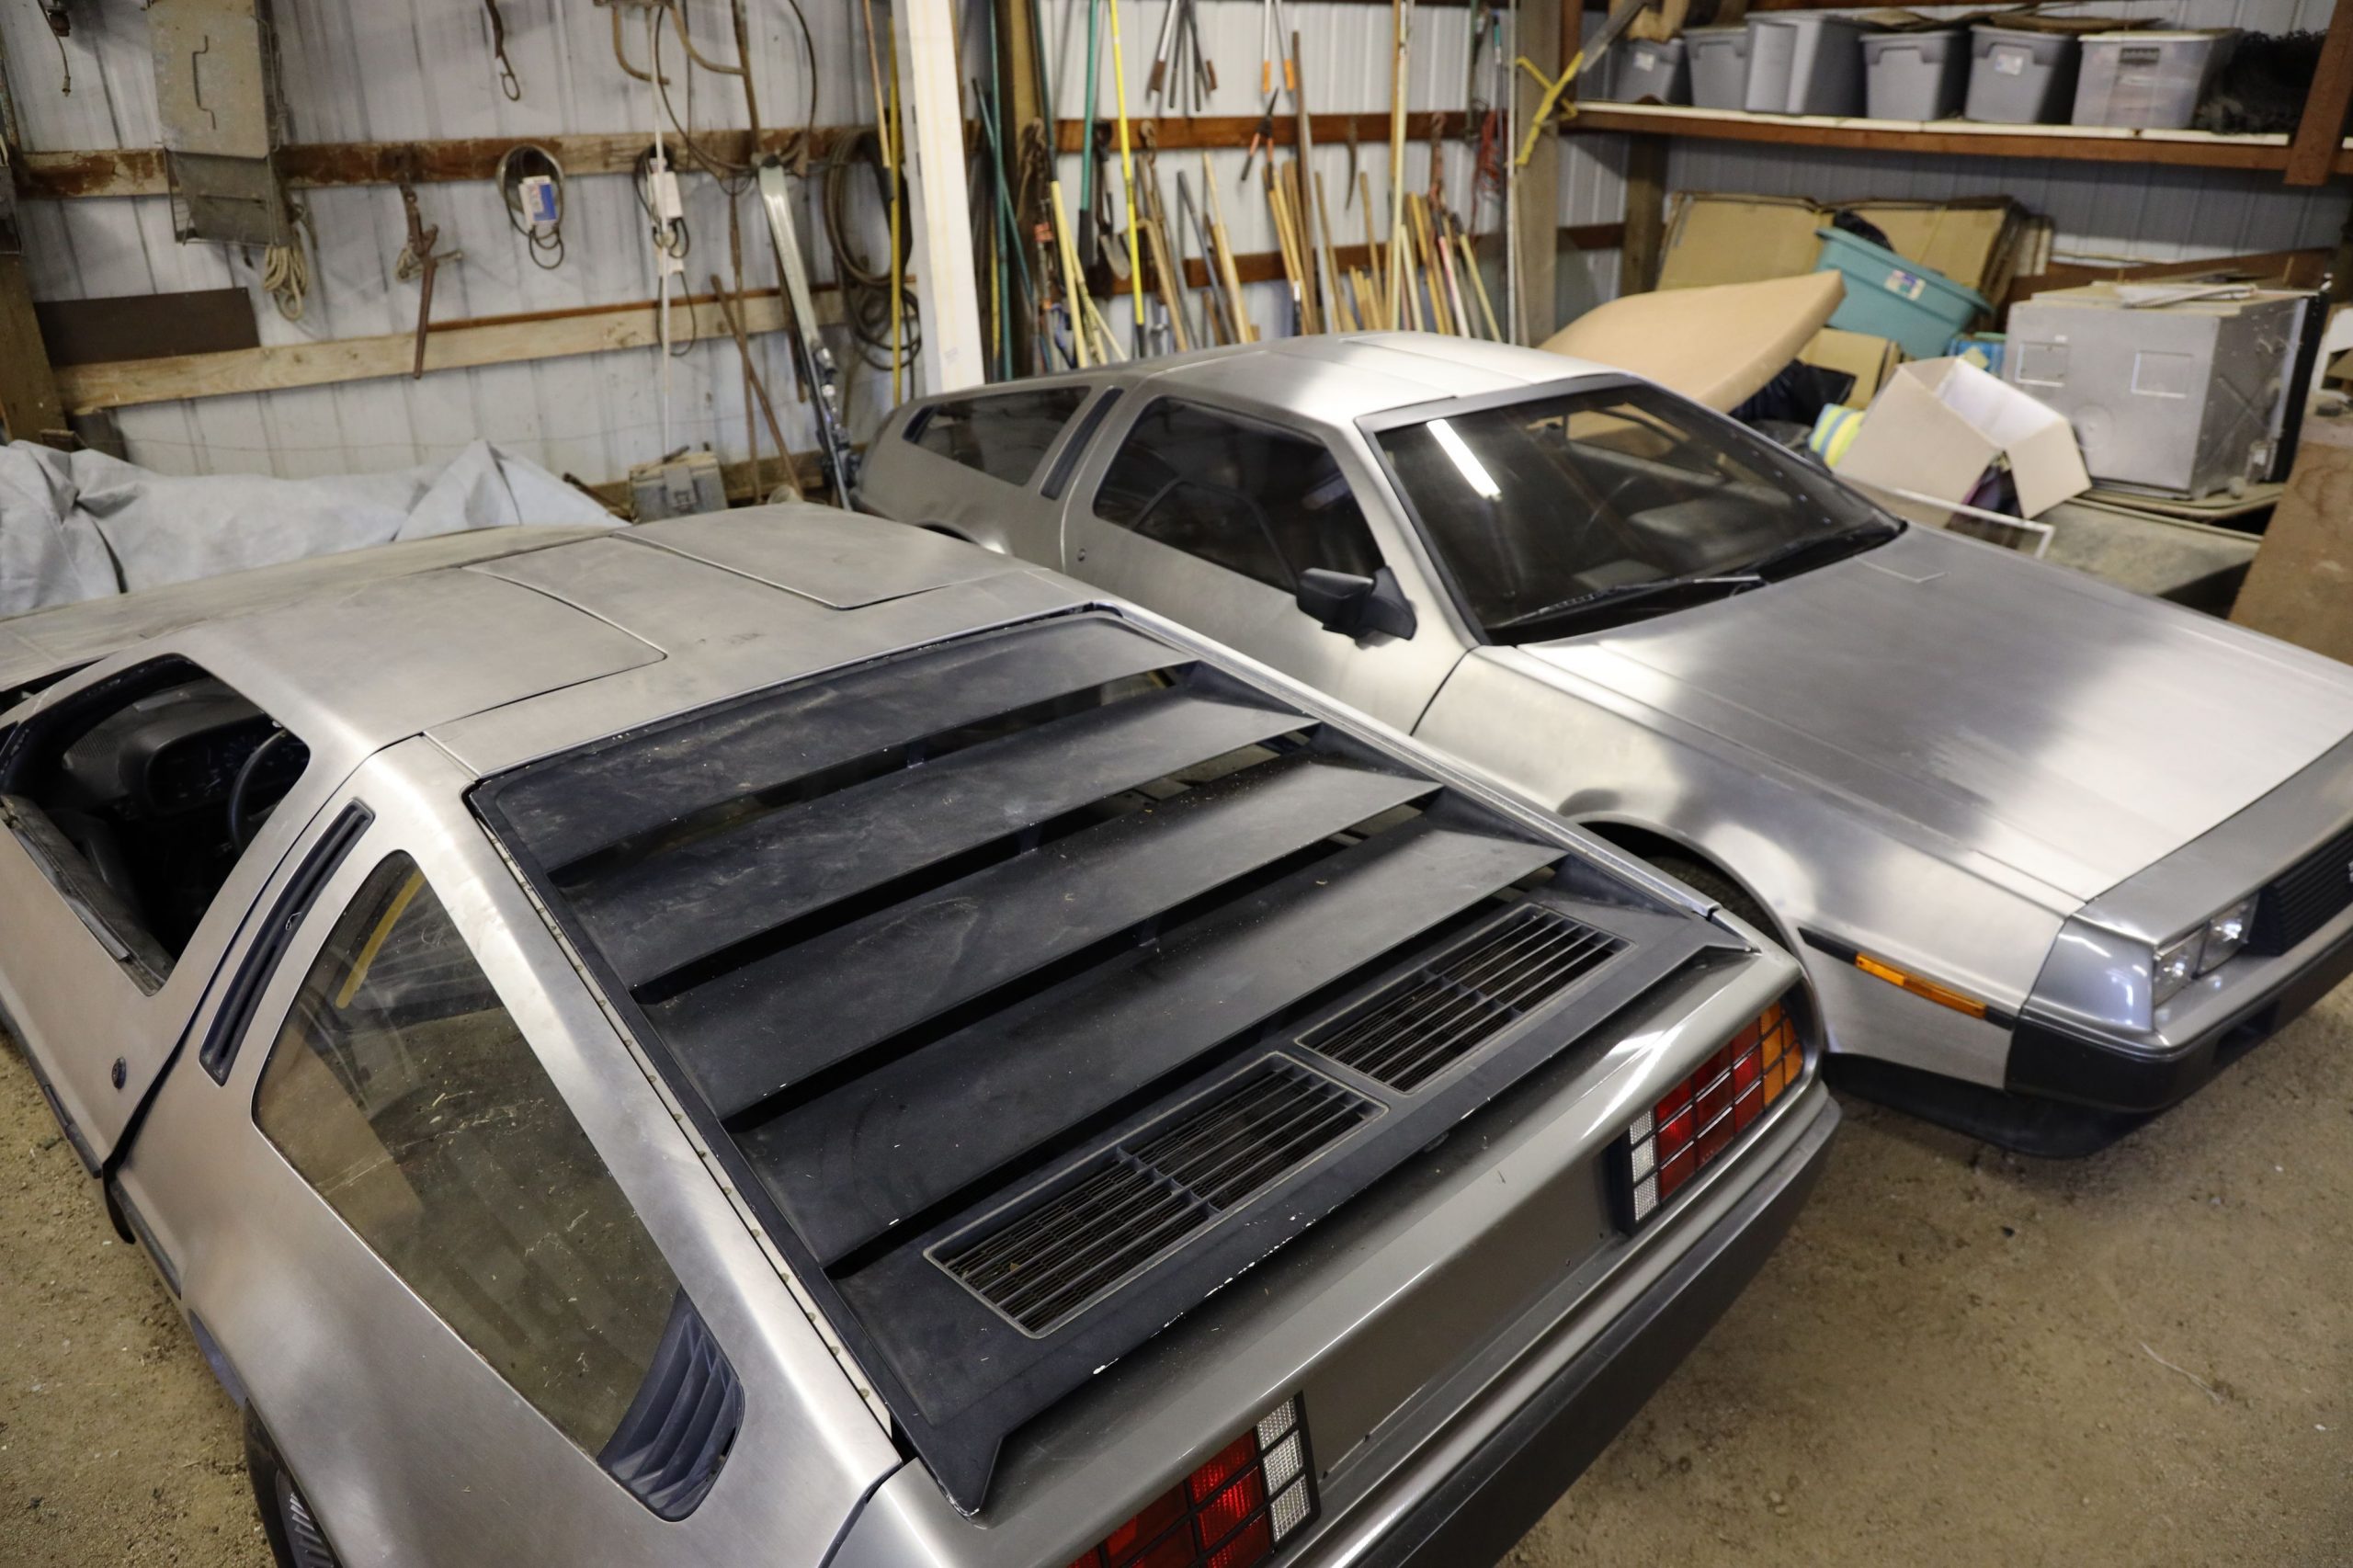 Two new Delorean coupes for sale